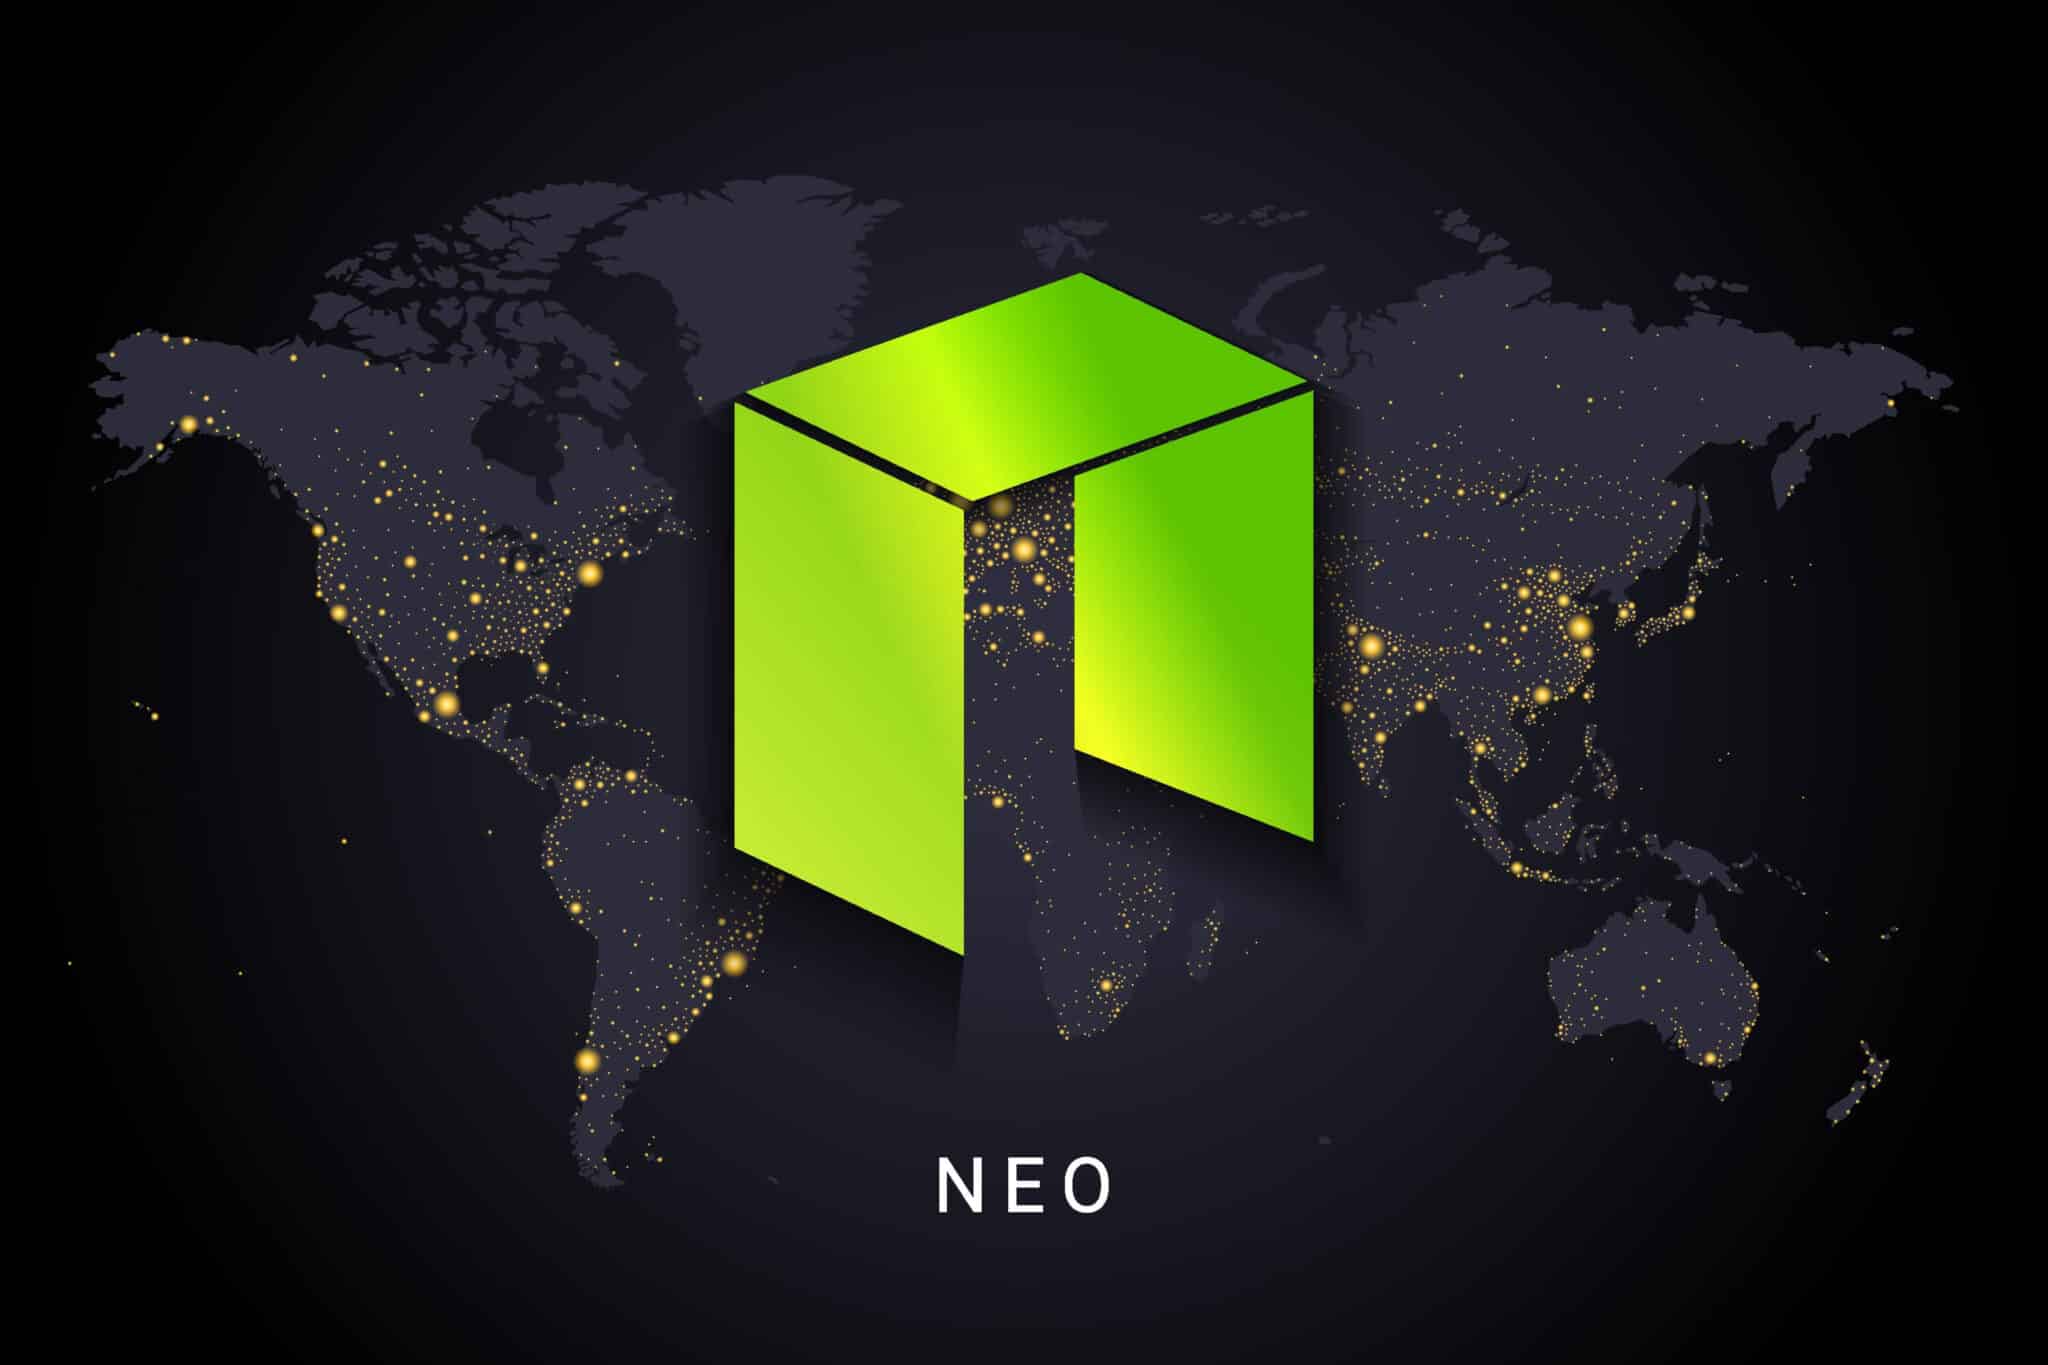 NEO crypto coin logo backdropped by international map.